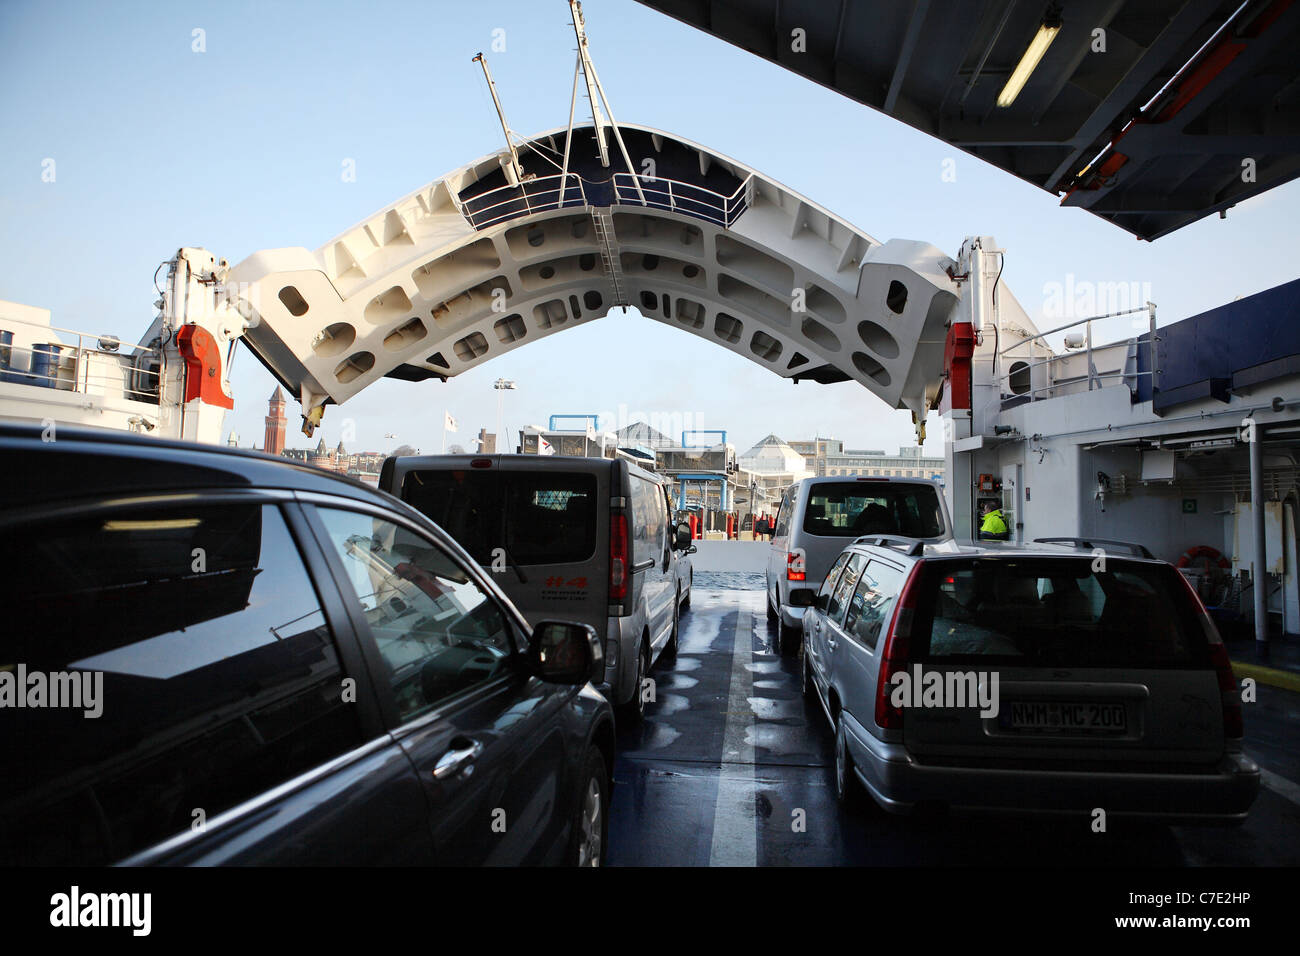 Cars shortly before disembarking a car ferry, Helsingborg, Sweden Stock Photo